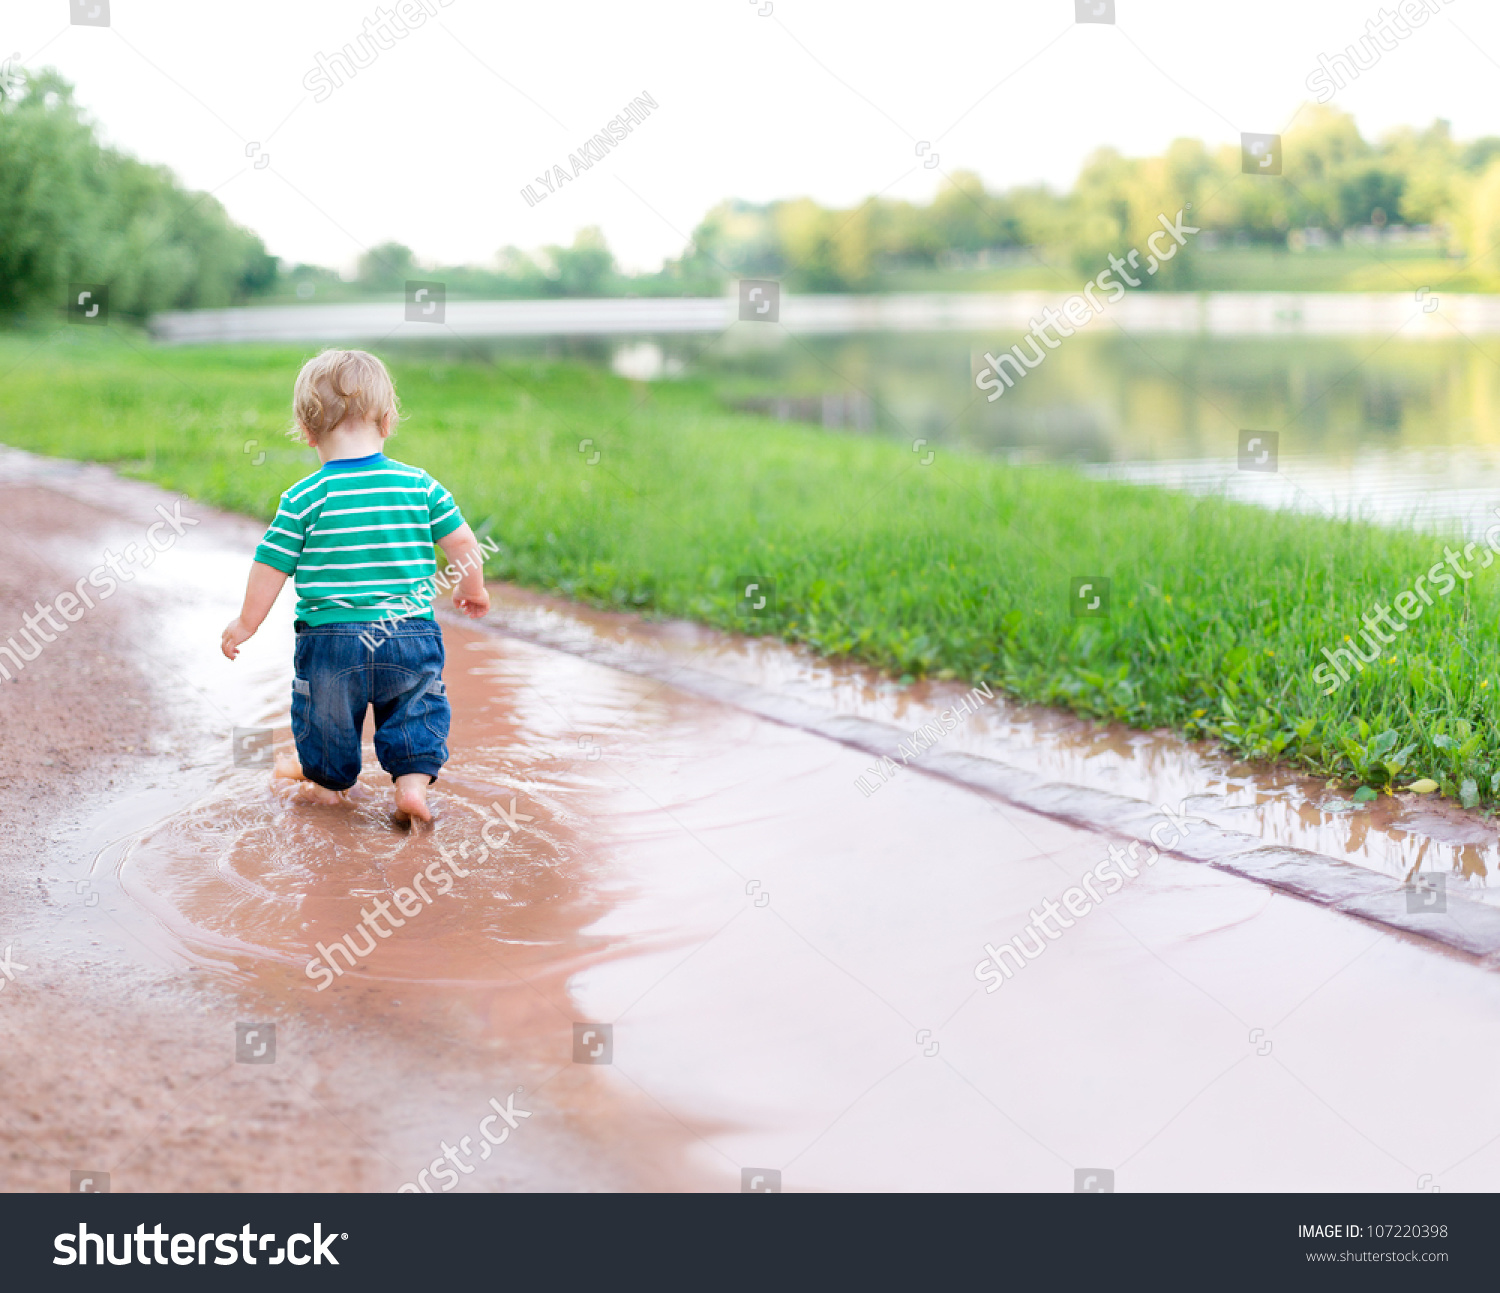 Child Walks On The Puddles After The Rain Stock Photo 107220398 ...